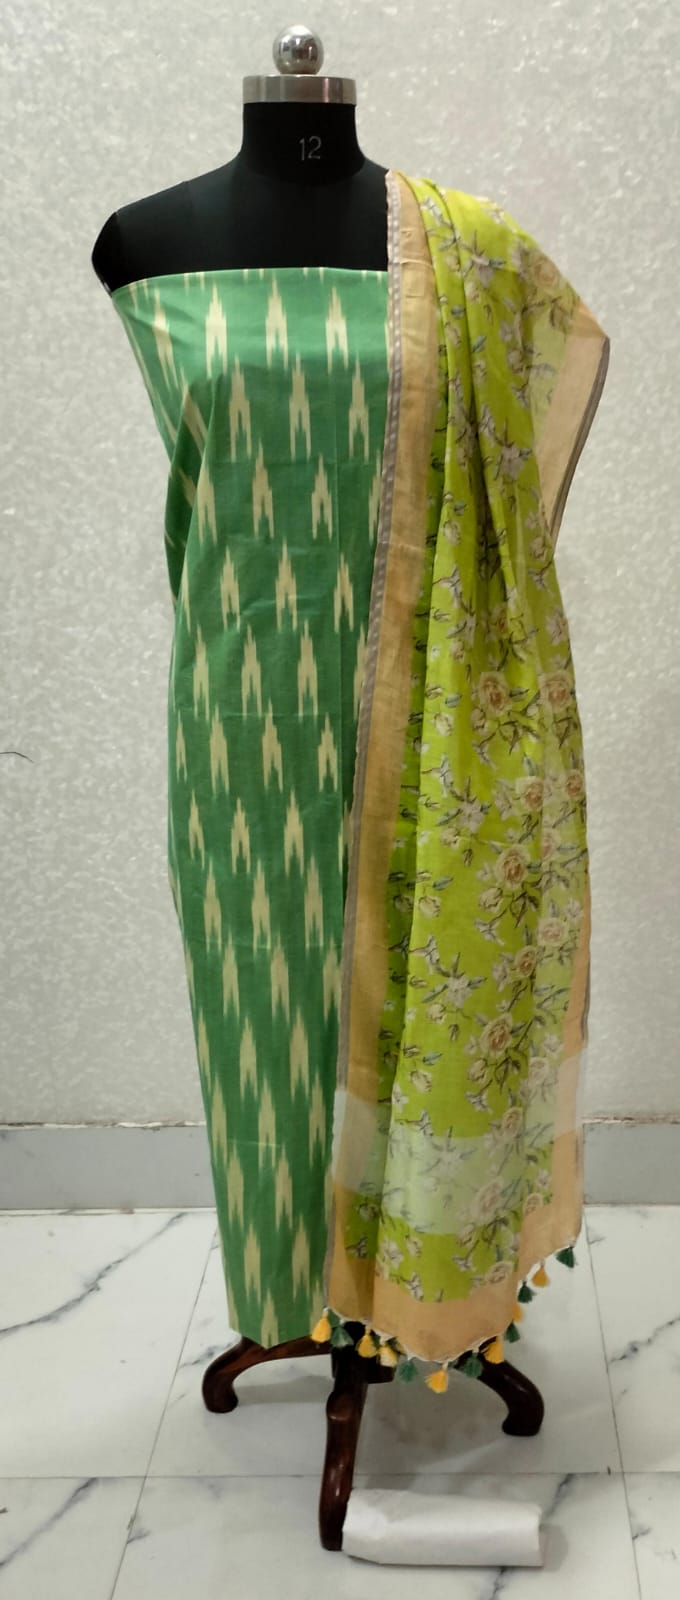 Green Shade Handloom Ikkat Top and Printed Linen Dupatta 2Pc Unstitched Dress Material